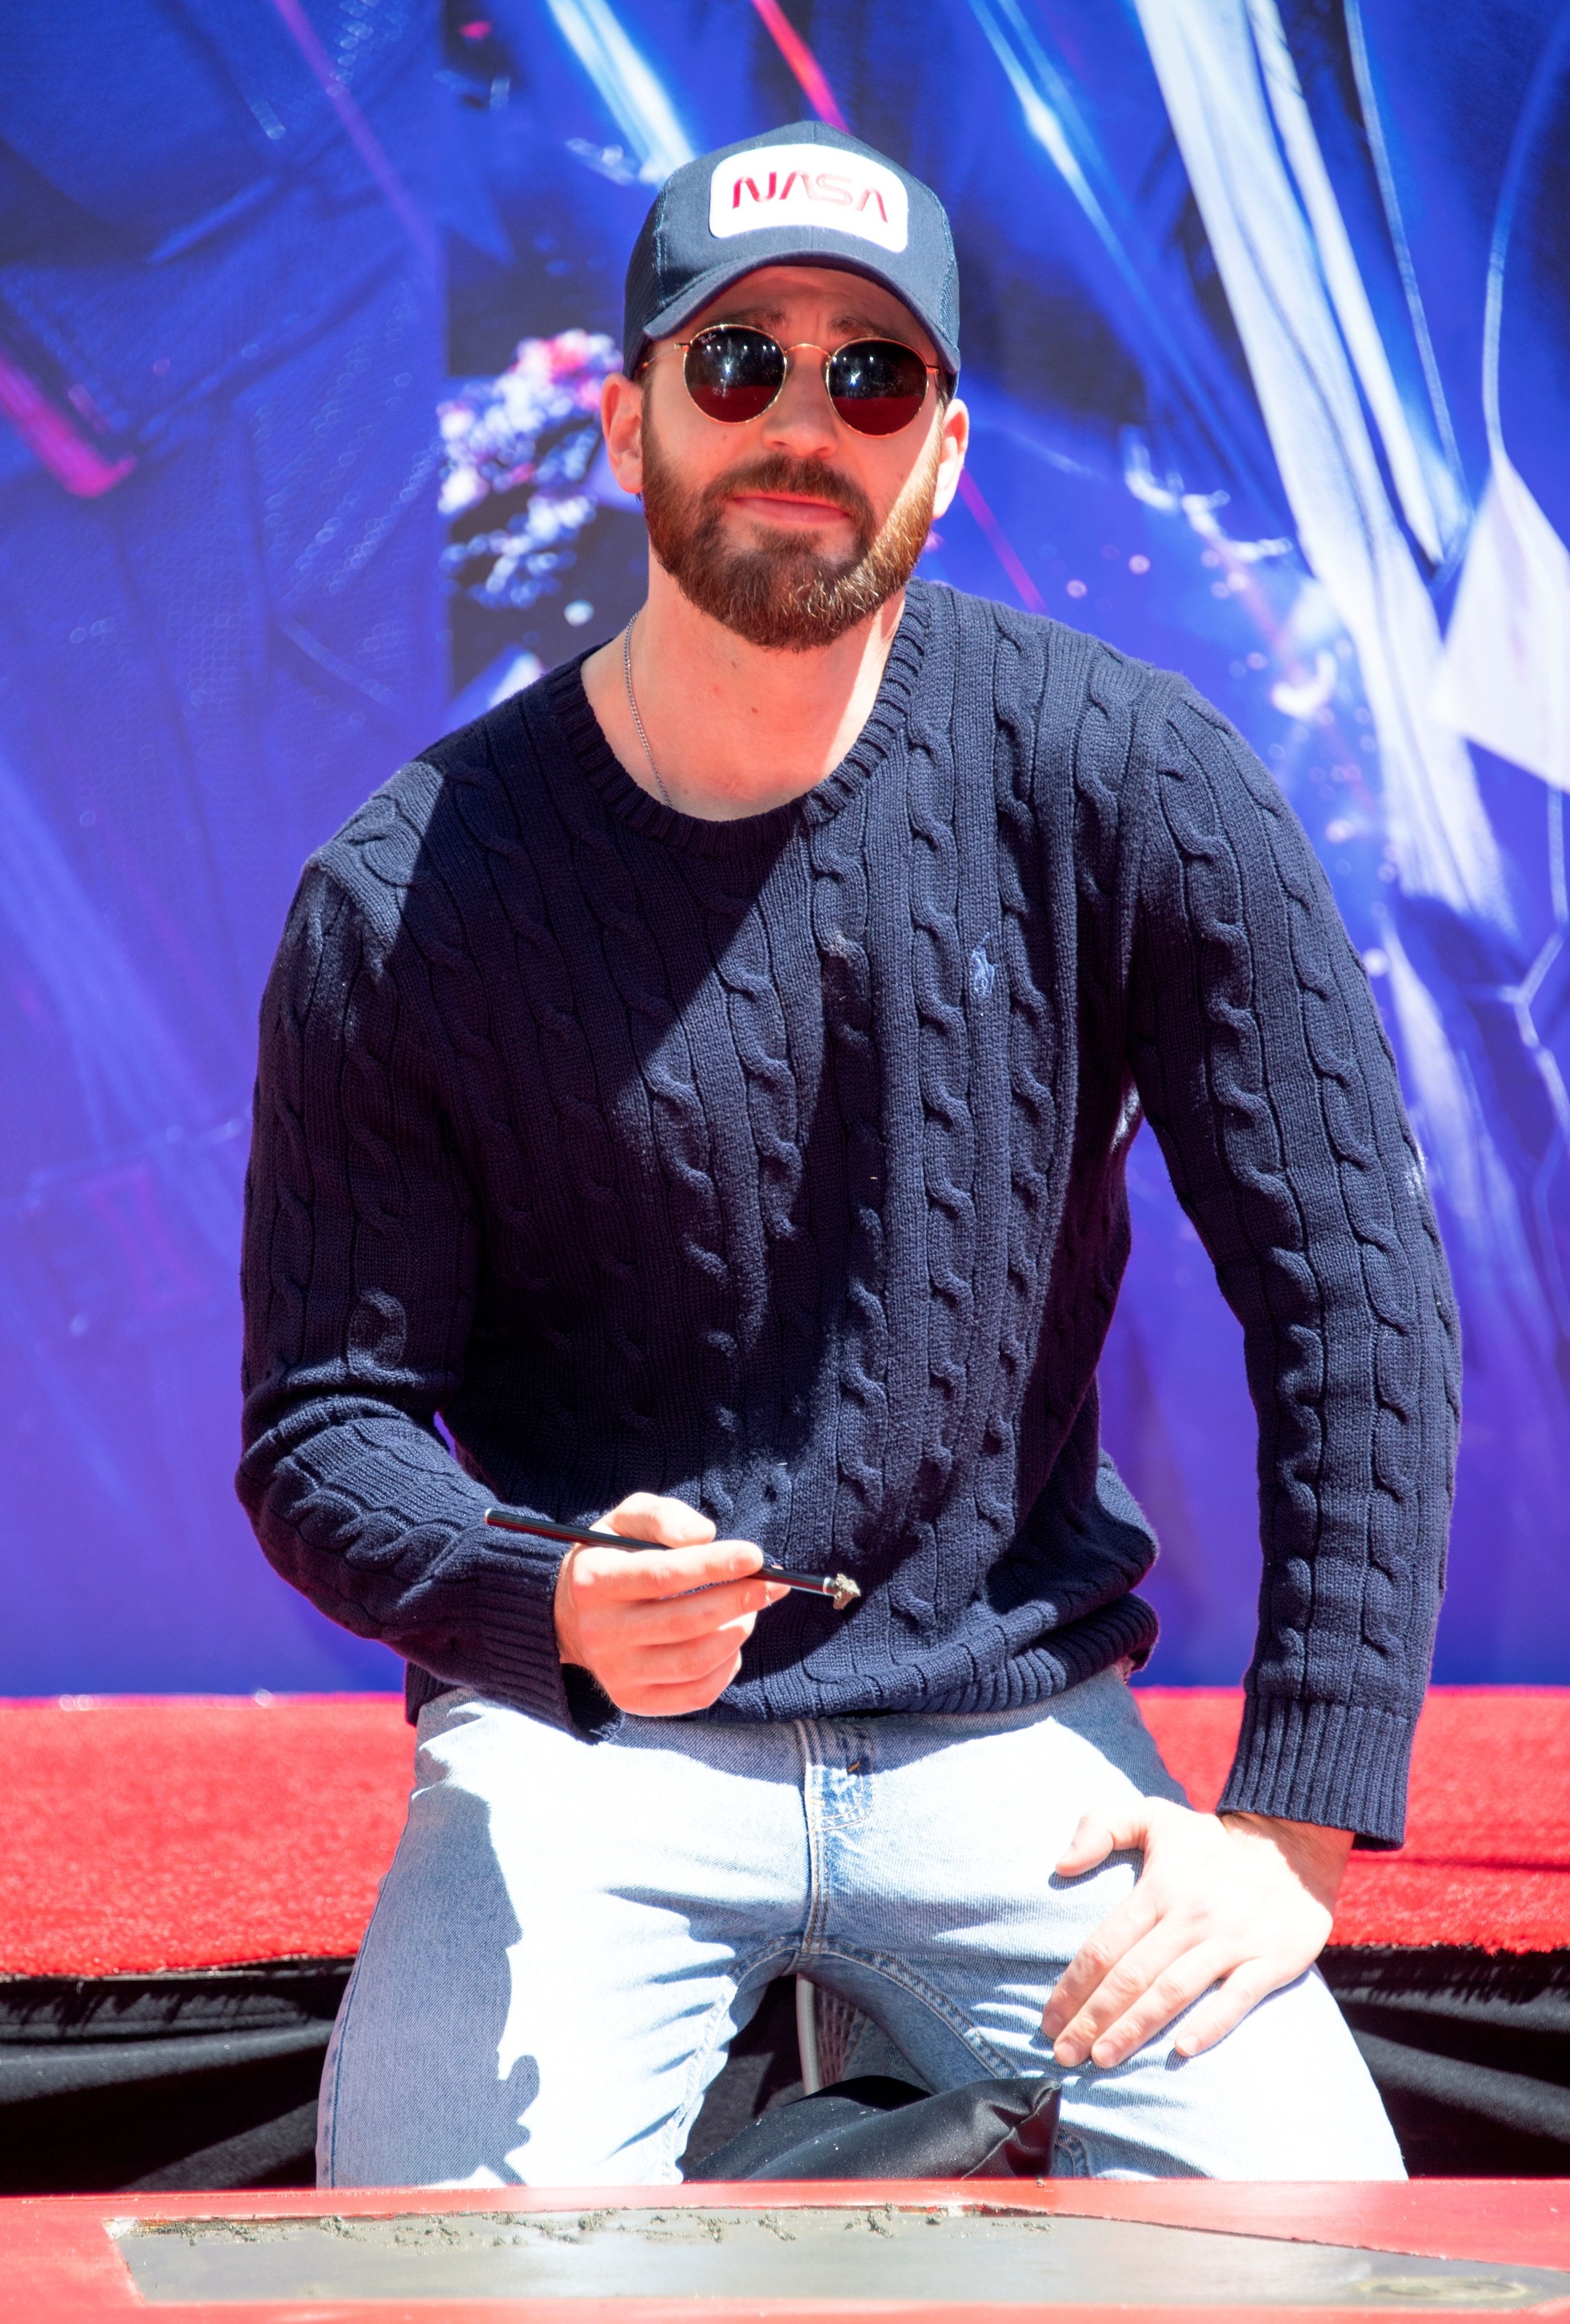 Chris on his knees in a cap, sunglasses, sweater, and jeans